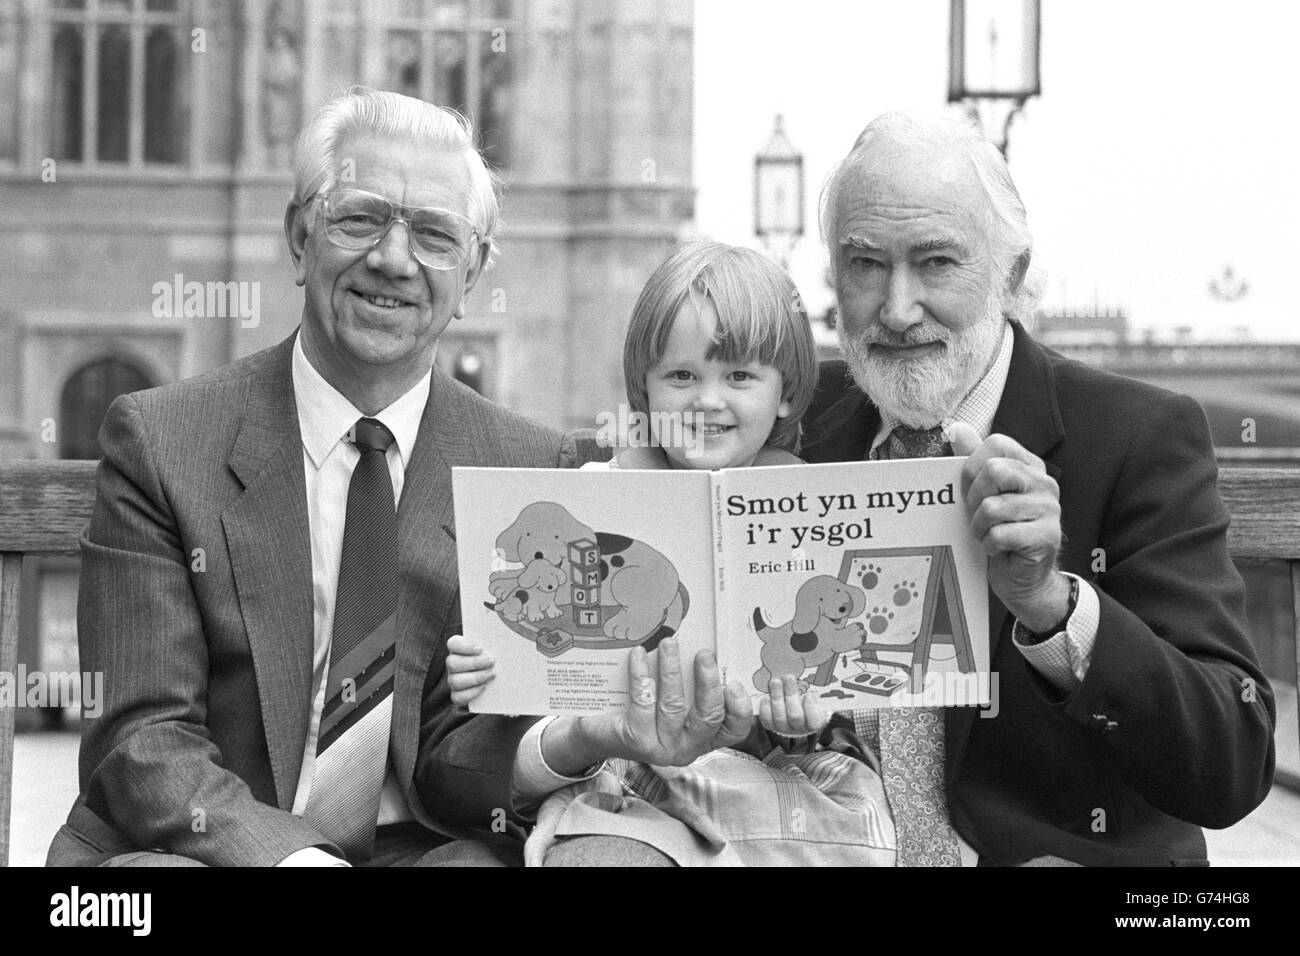 Gwenan Lockley of Llanrindod, Wales, reads the Welsh edition of a Spot children's book to Jack Ashley MP (left) and Spot creator Eric Hill. She was one of a group of children who demonstrated their reading abilities to mark the publishing of the books in minority languages, as well as marking Spot's BBC TV debut on April 9th. Stock Photo